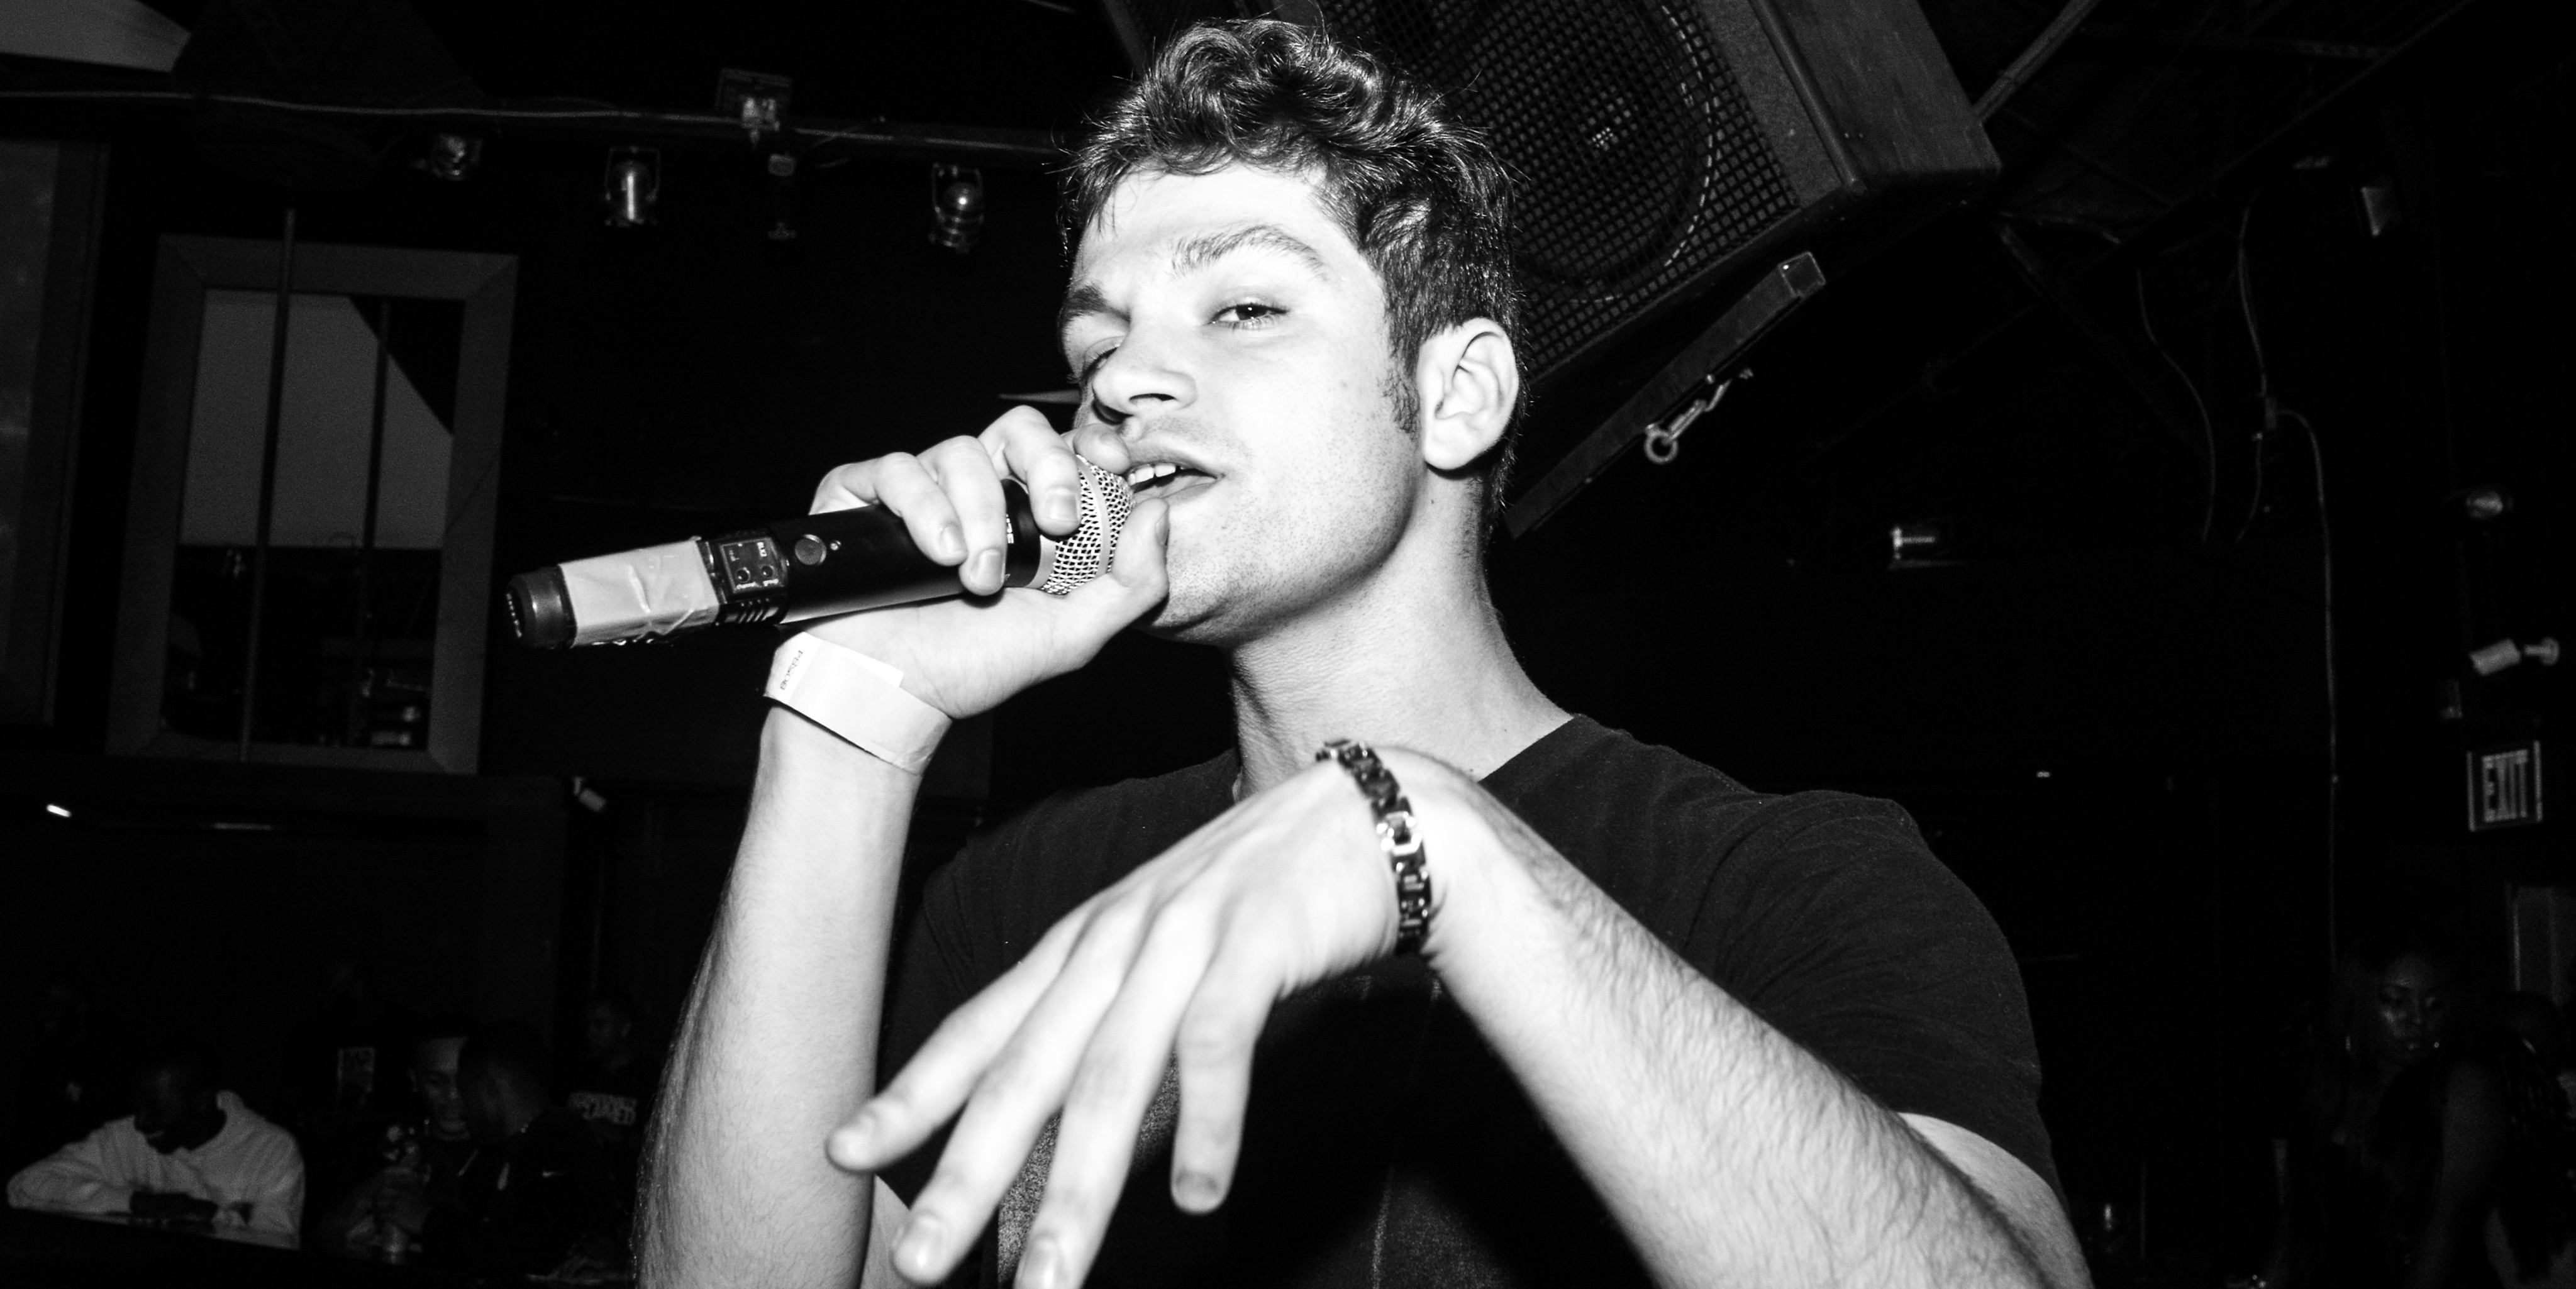 Black and white film still of a young man singing into a handheld mic, glancing at the camera with a confident expression.